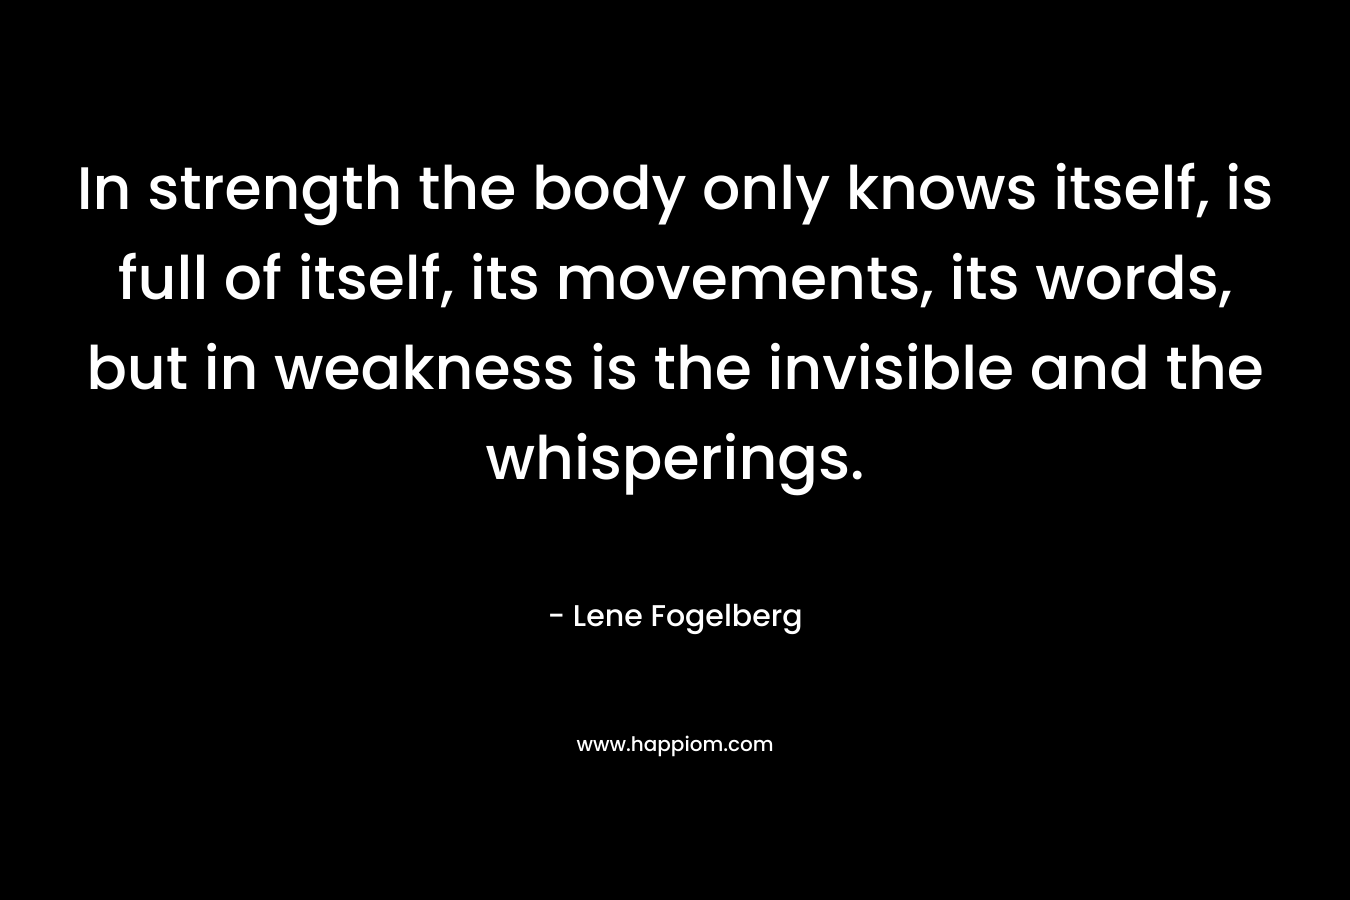 In strength the body only knows itself, is full of itself, its movements, its words, but in weakness is the invisible and the whisperings. – Lene Fogelberg